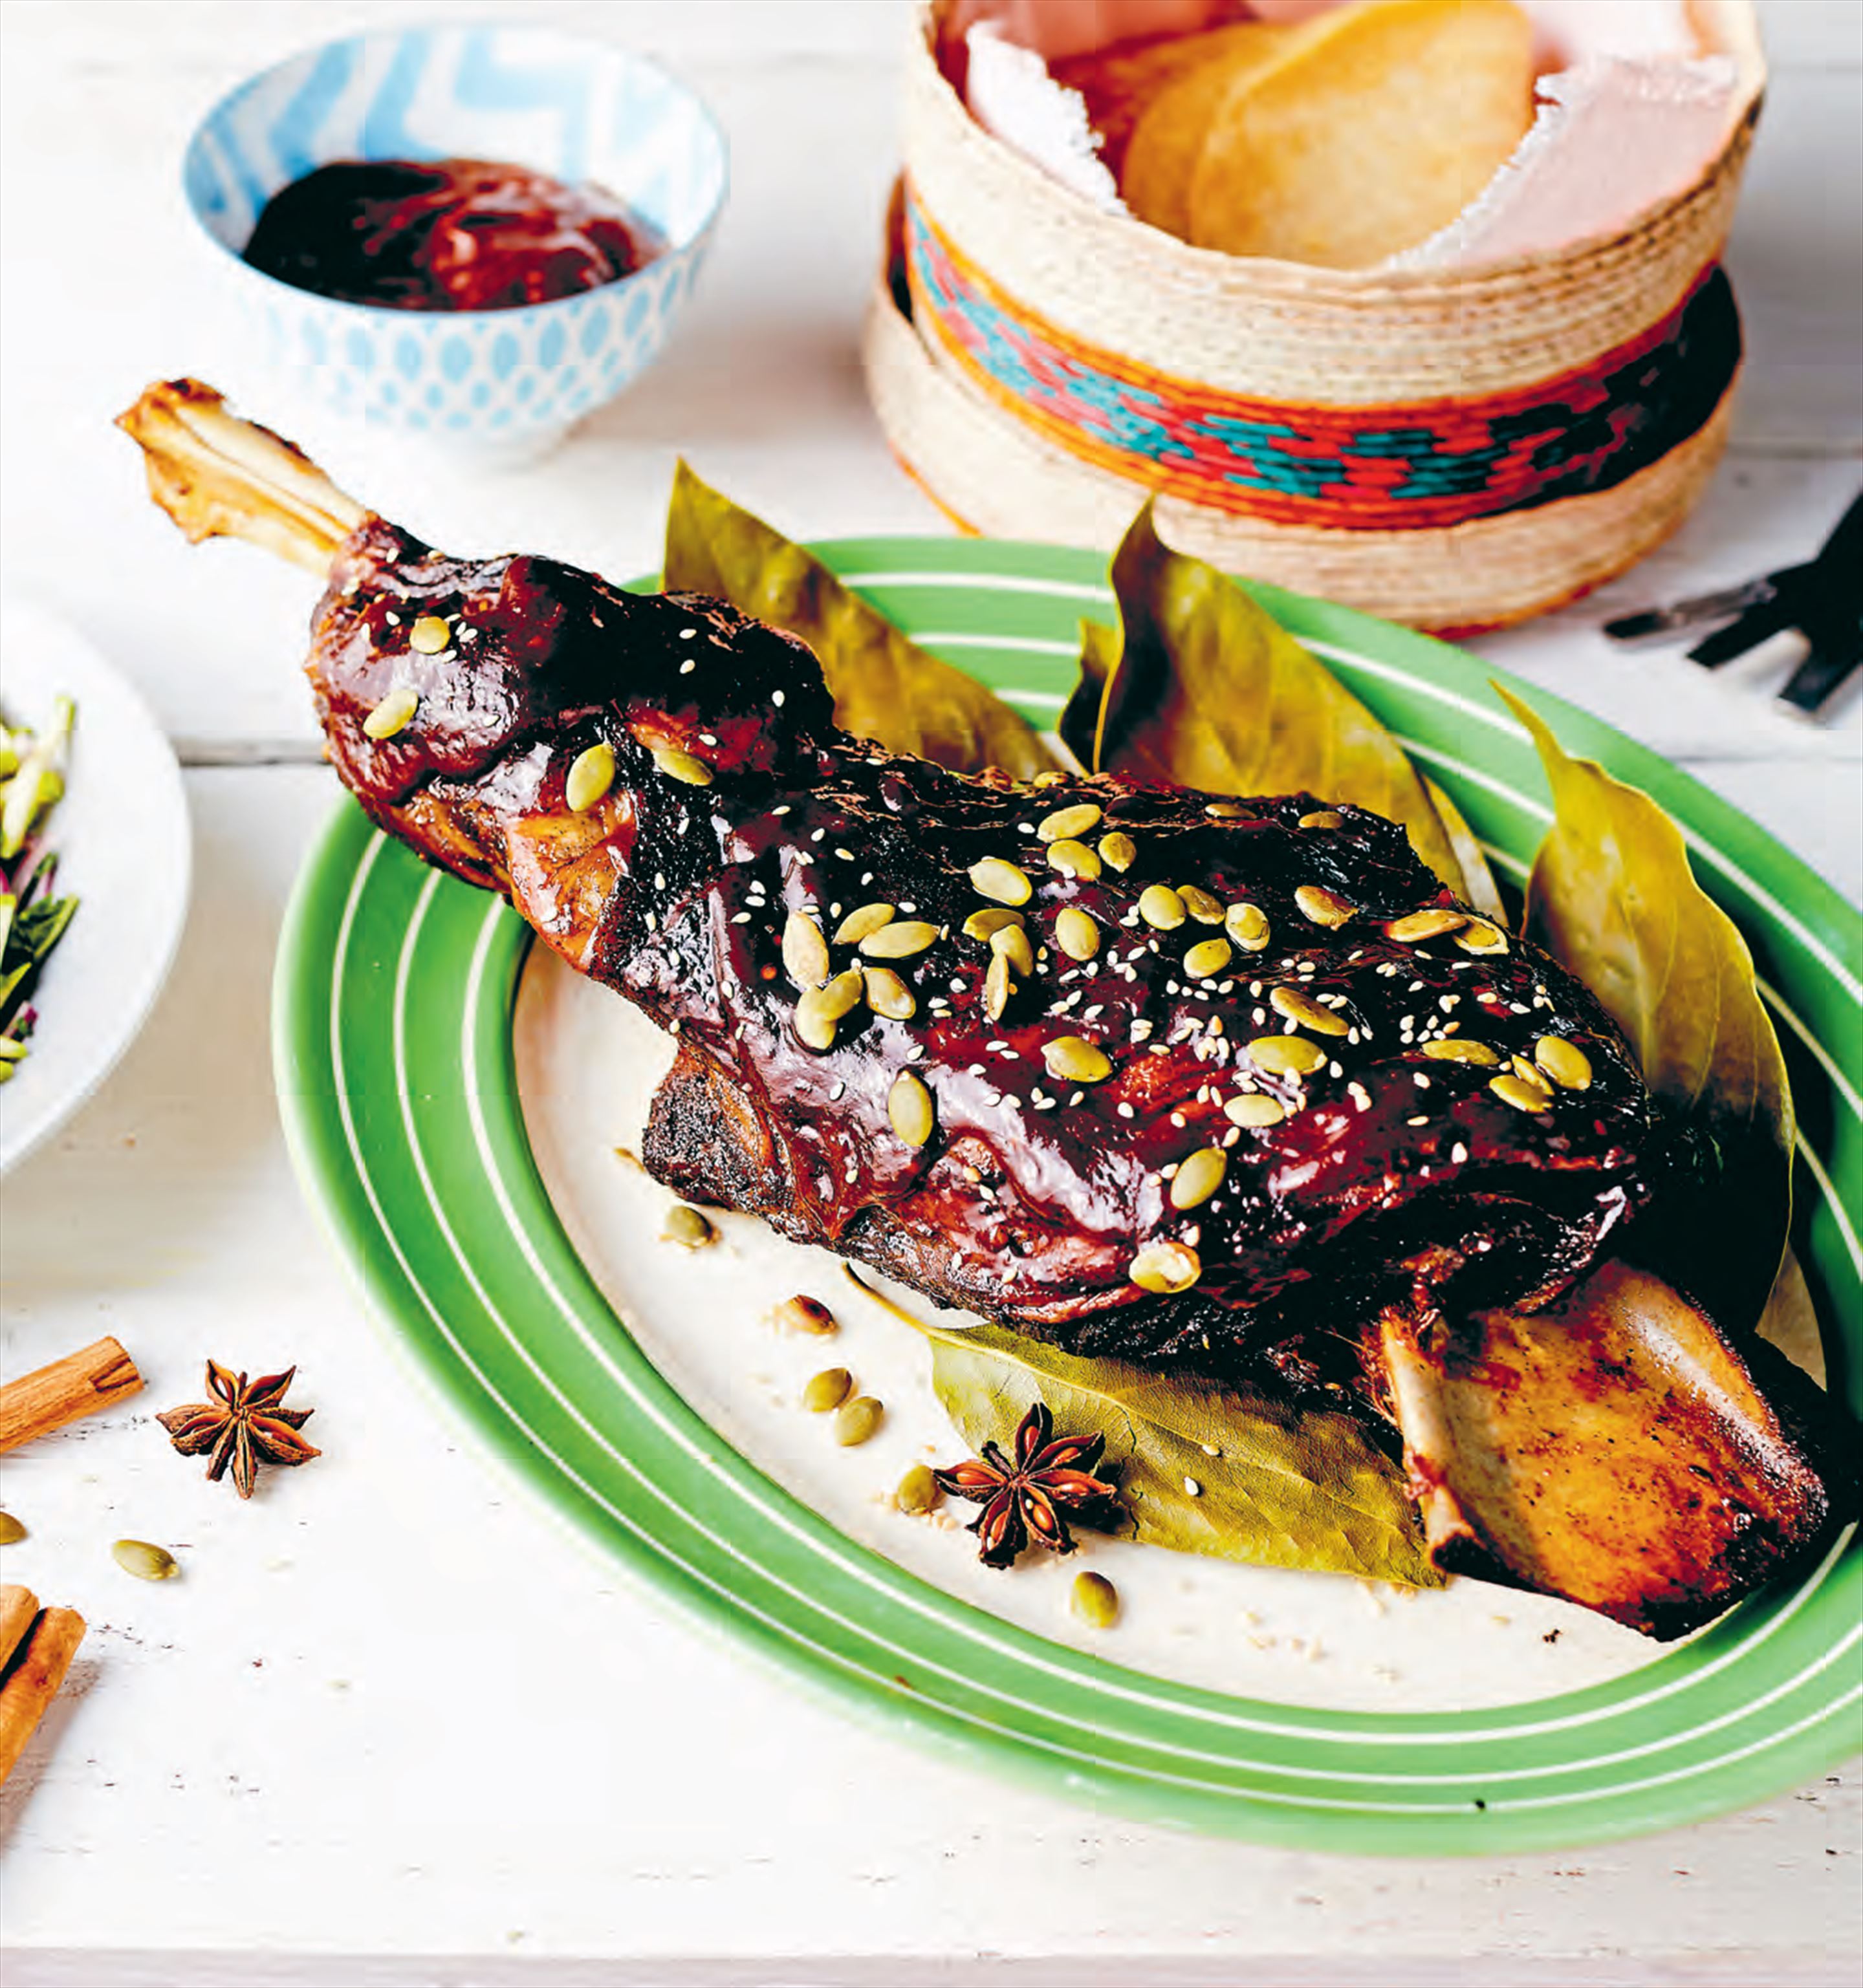 Slow roasted lamb ‘barbecoa style’ with tamarind chilli mole